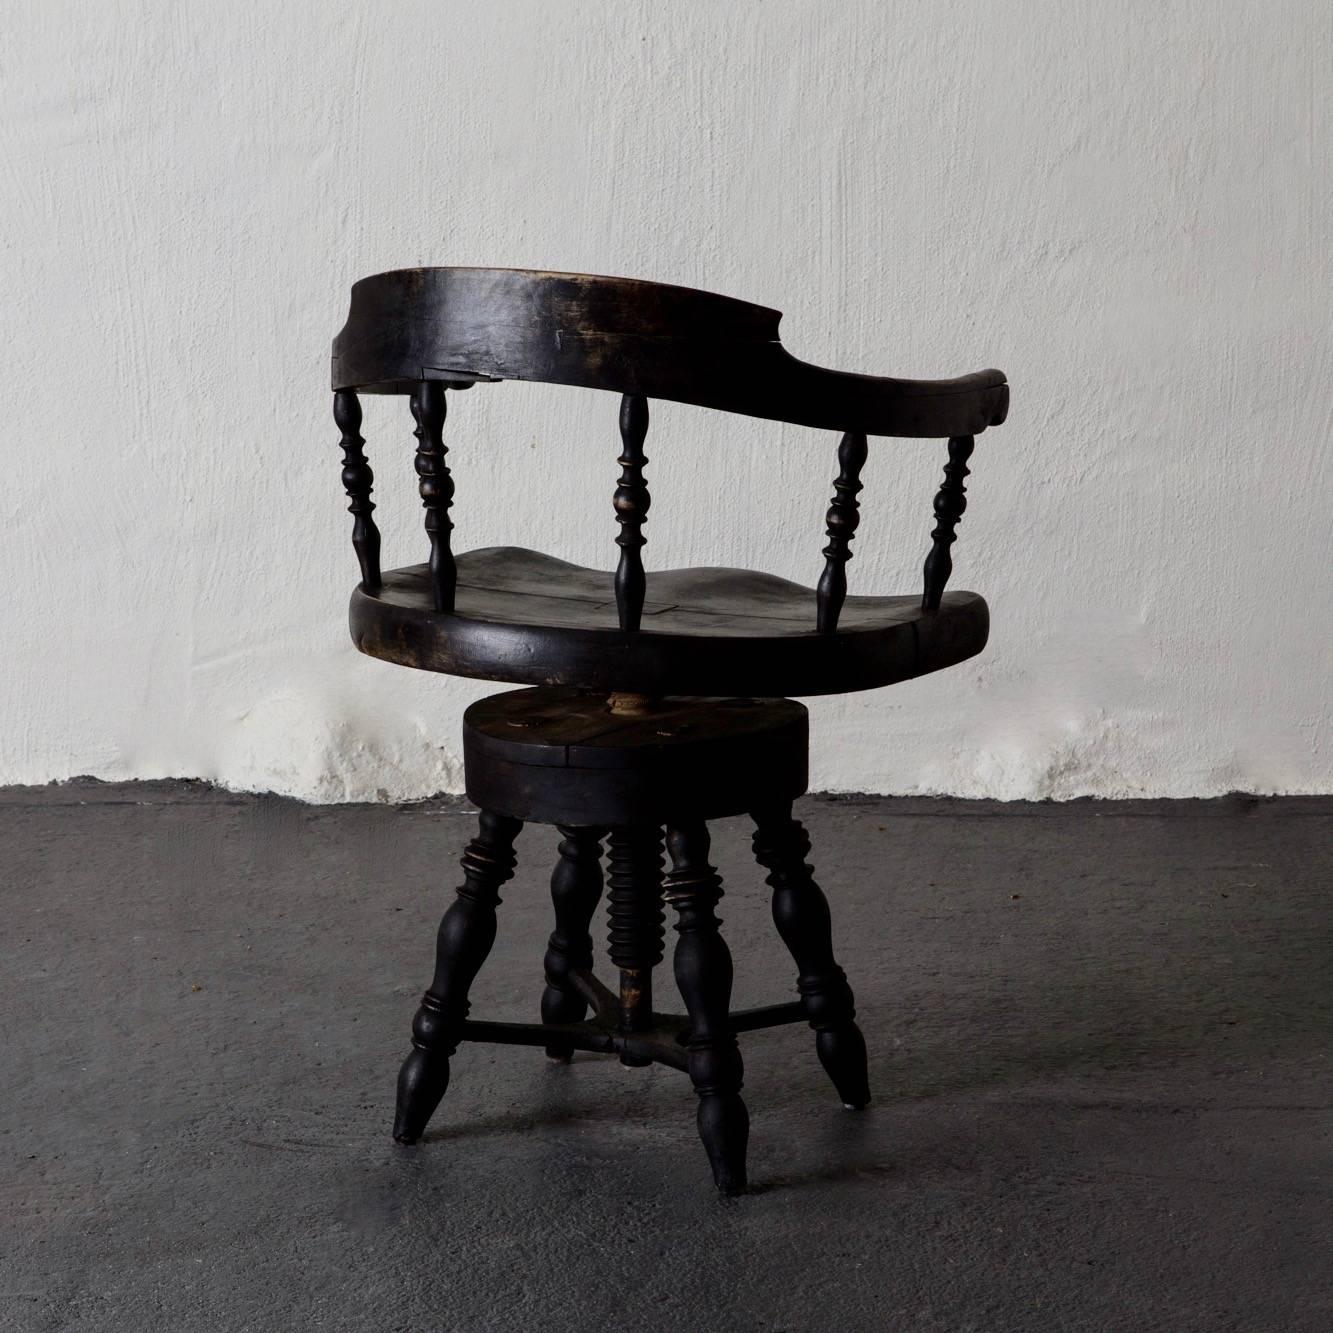 Armchair desk chair Swedish 19th century in black, Sweden. An armchair made during the late 19th century in Sweden. Adjustable height. Repainted in our custom paint Laserow black.
 